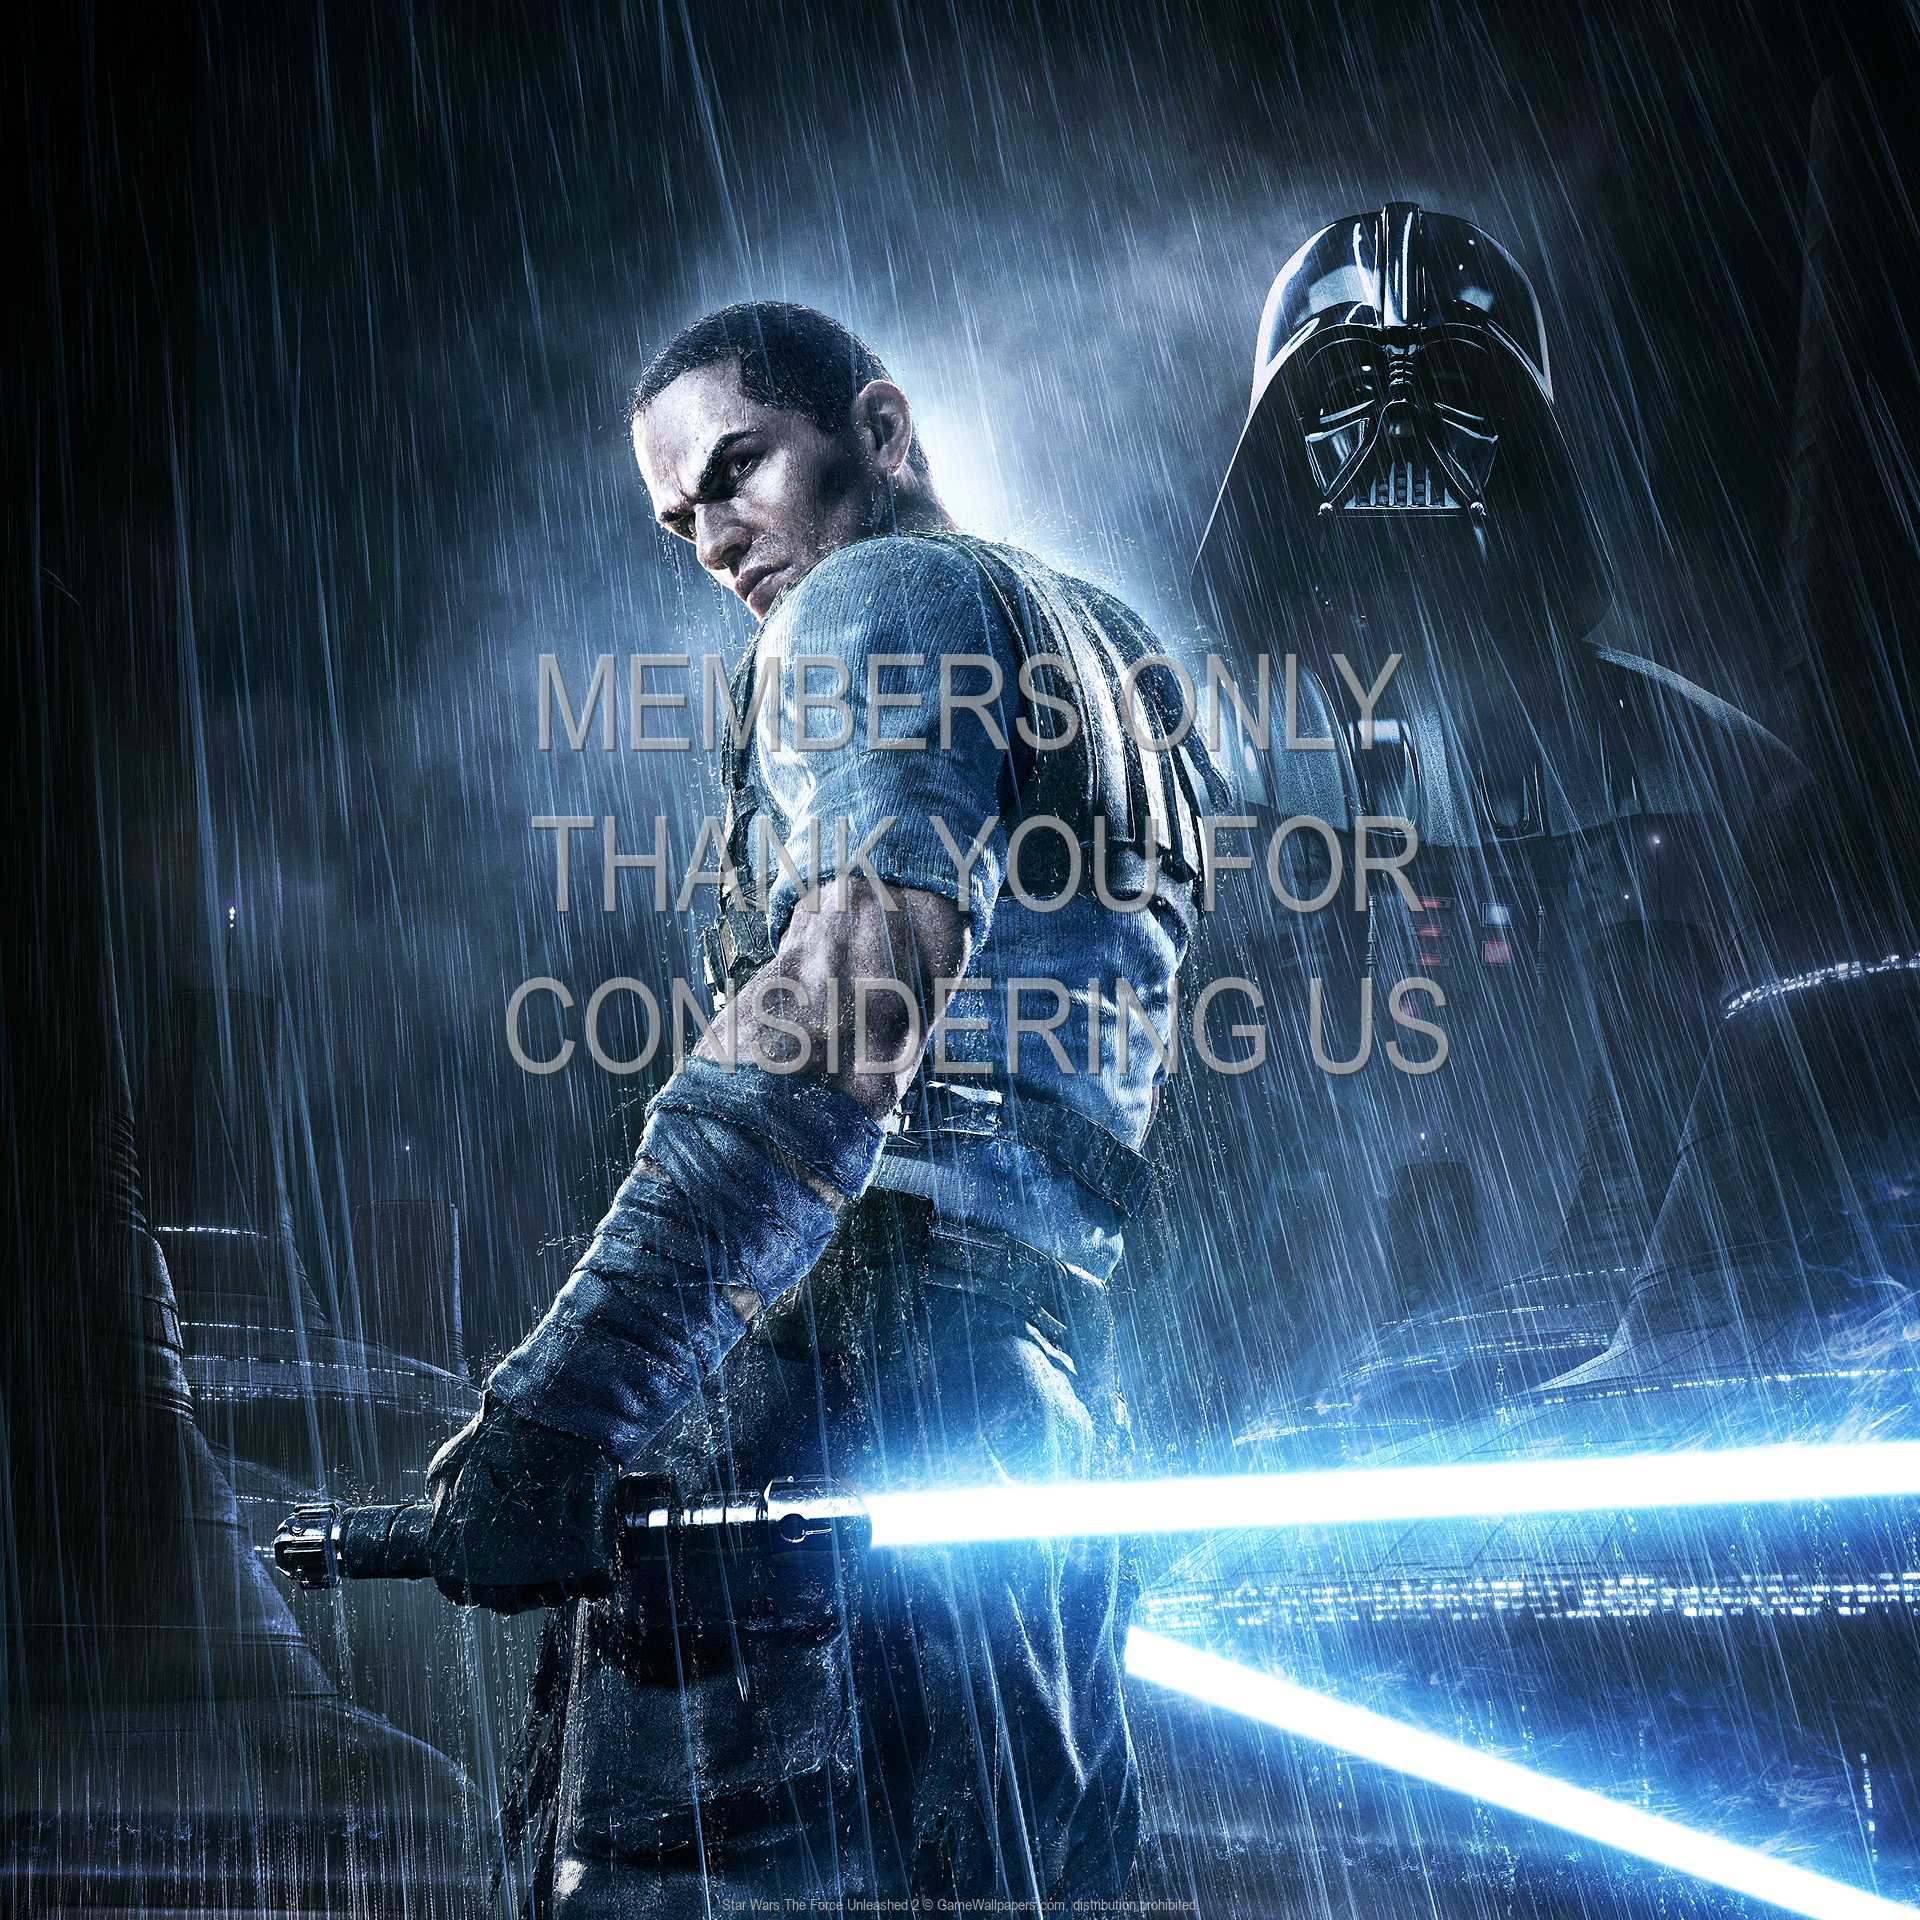 Star Wars: The Force Unleashed 2 1080p Horizontal Mobile wallpaper or background 02